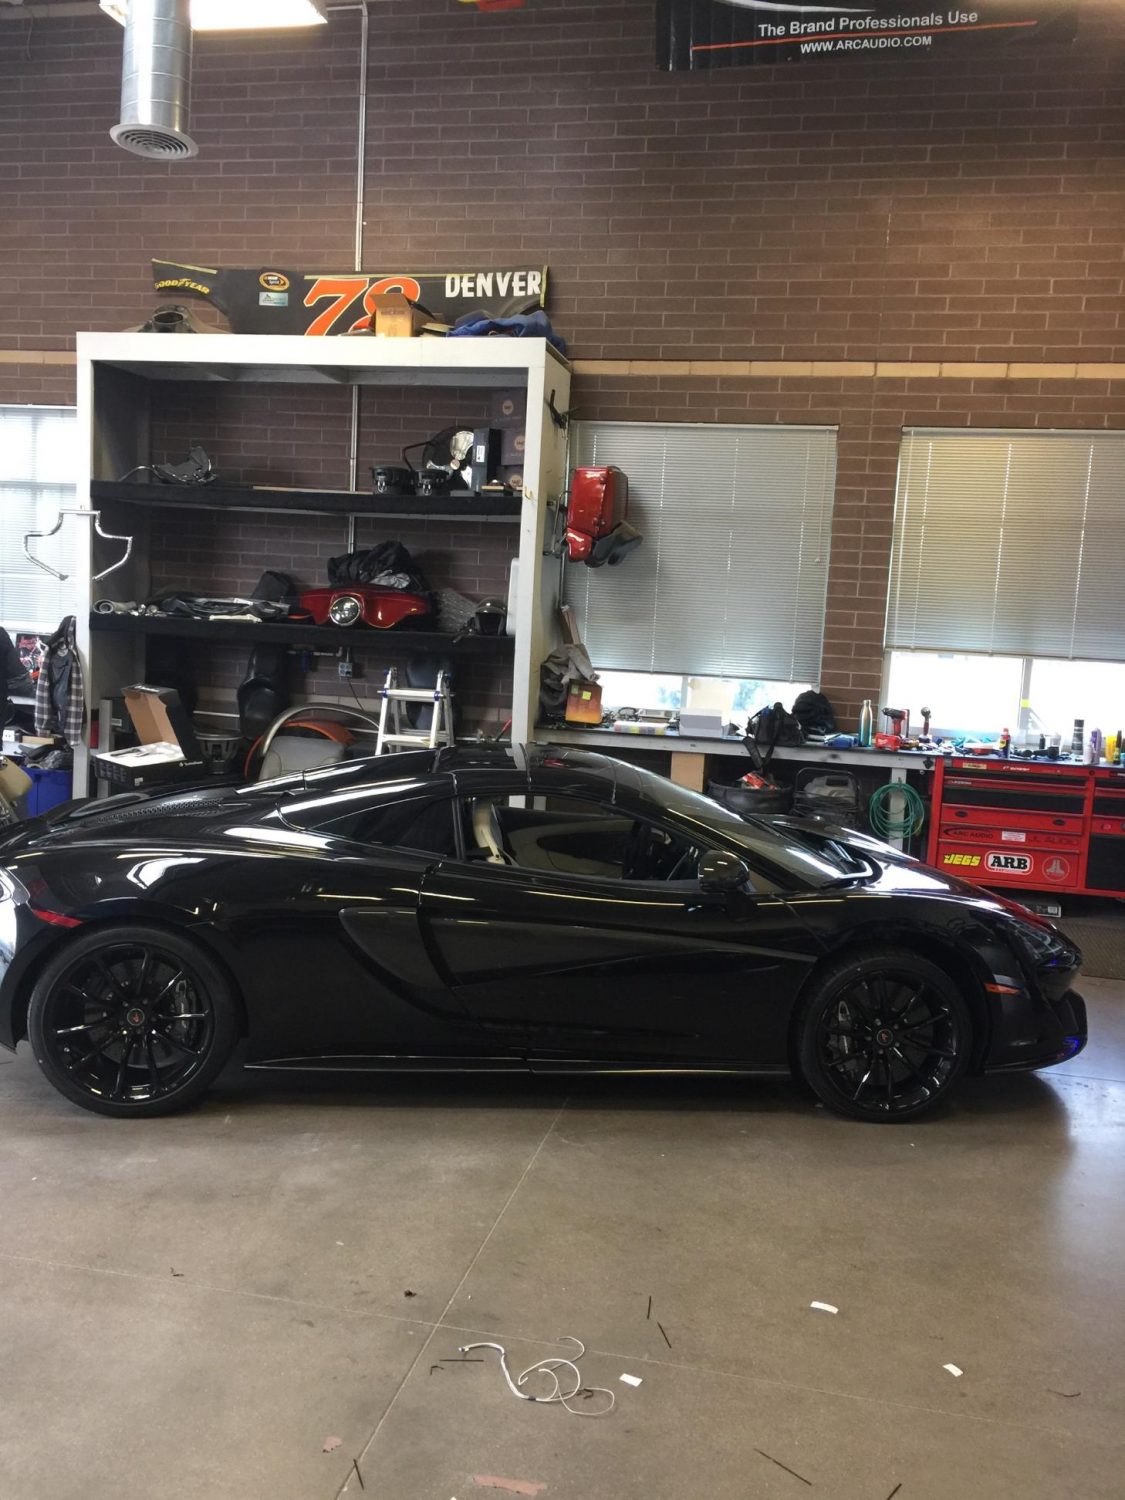 sideview of a 2018 Mclaren 570s spider in a shop